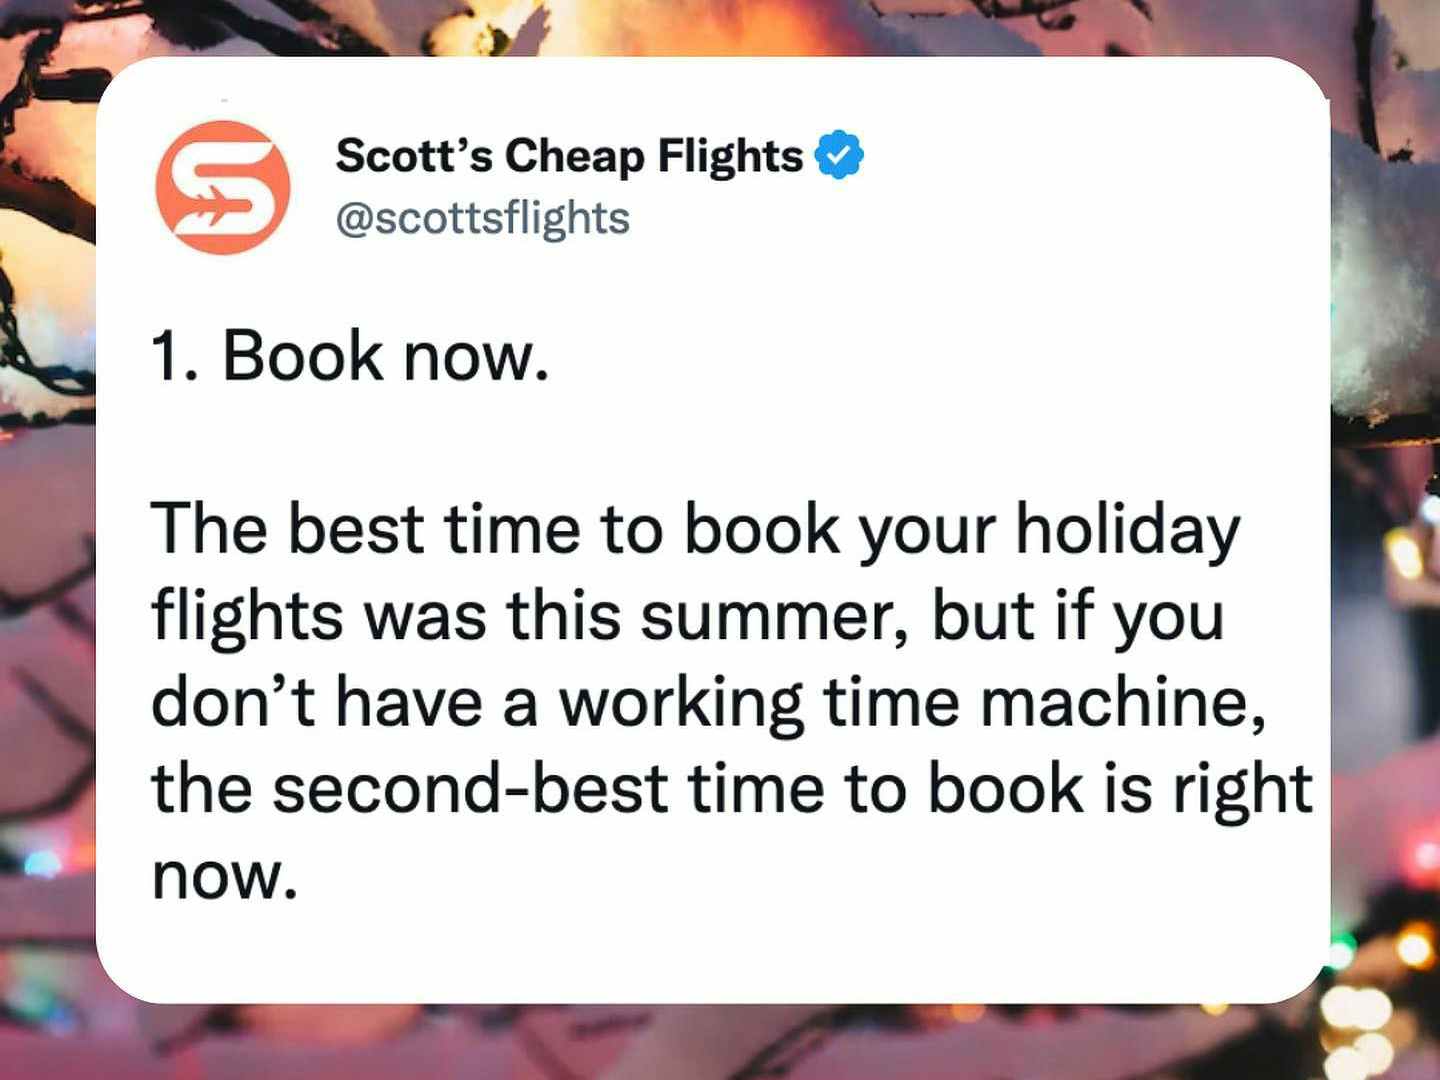 A tweet from Scott's Cheap Flights official Twitter account @scottsflights that reads, "1. Book now. The best time to book your holiday flights was this summer, but if you don't have a working time machine, the second best time to book is right now.